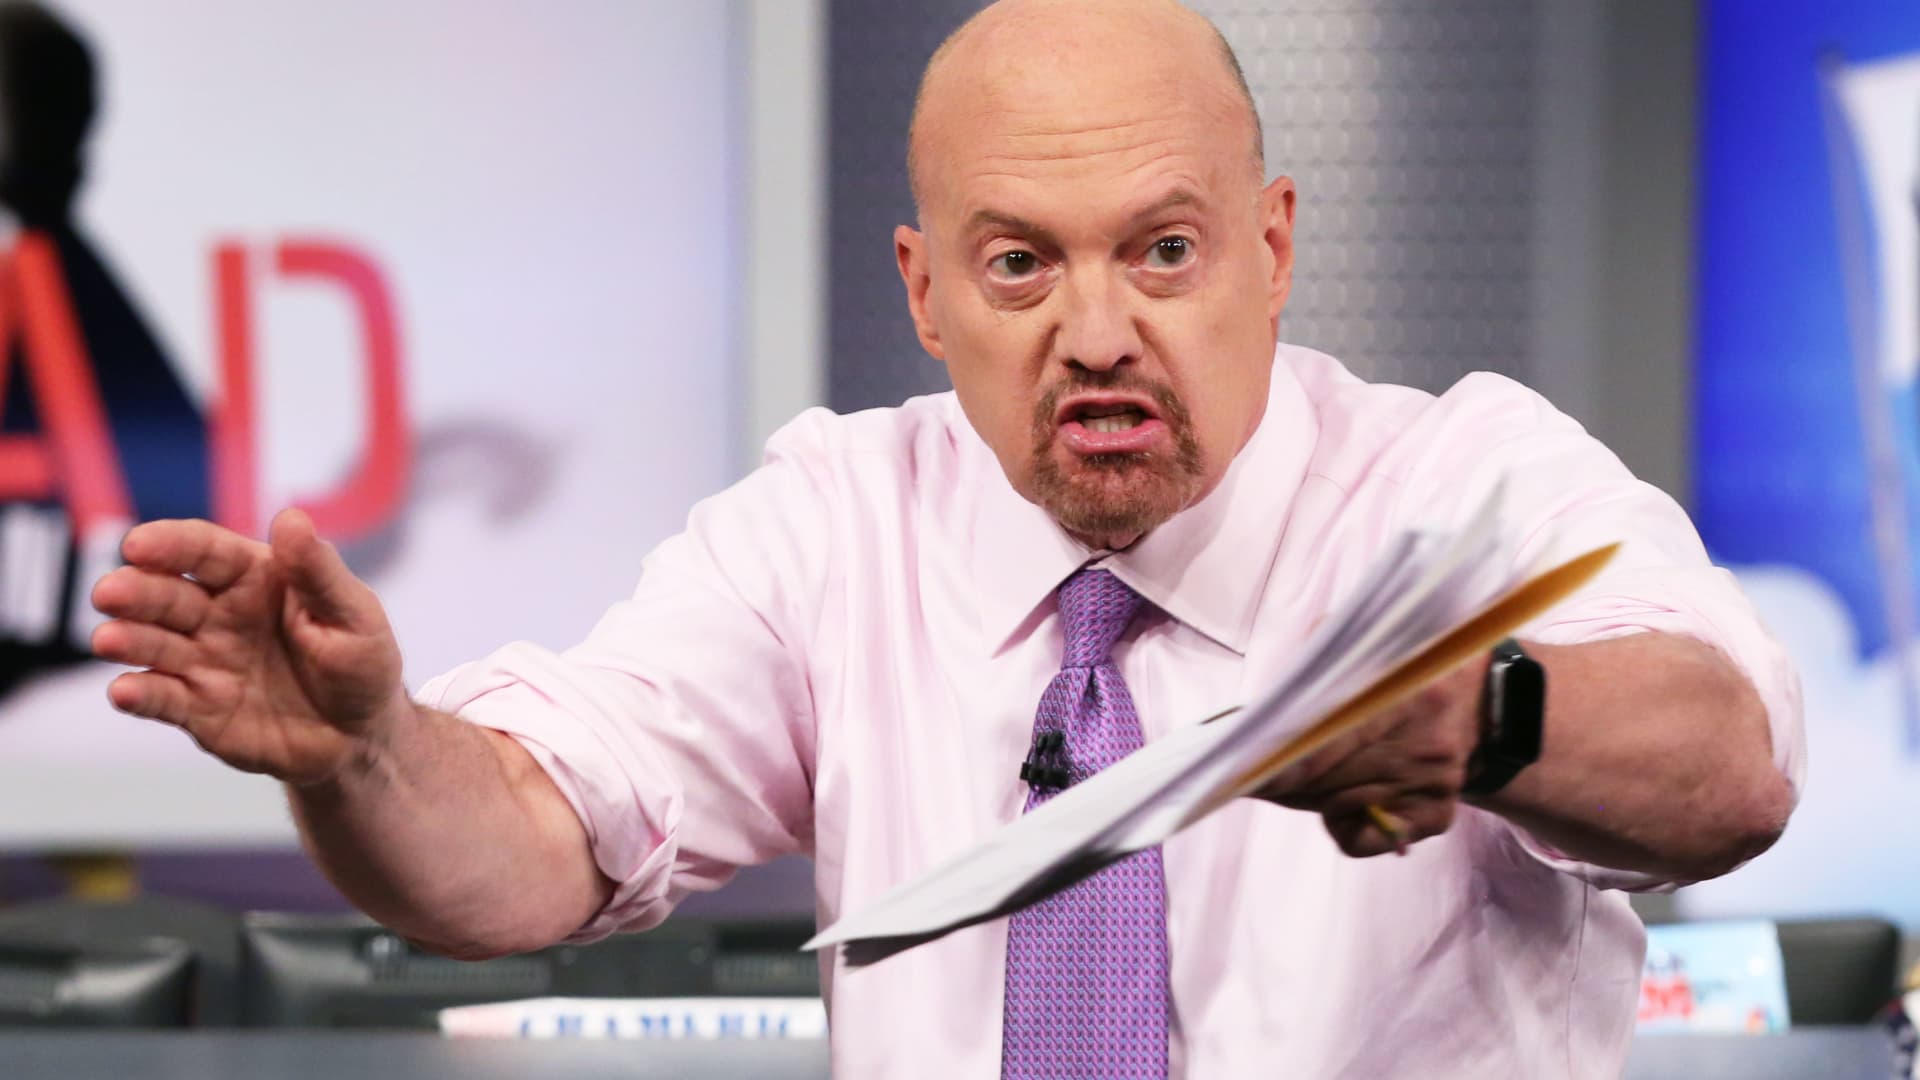 Cramer’s week ahead: 3 events will determine if the market’s bad momentum will continue in October